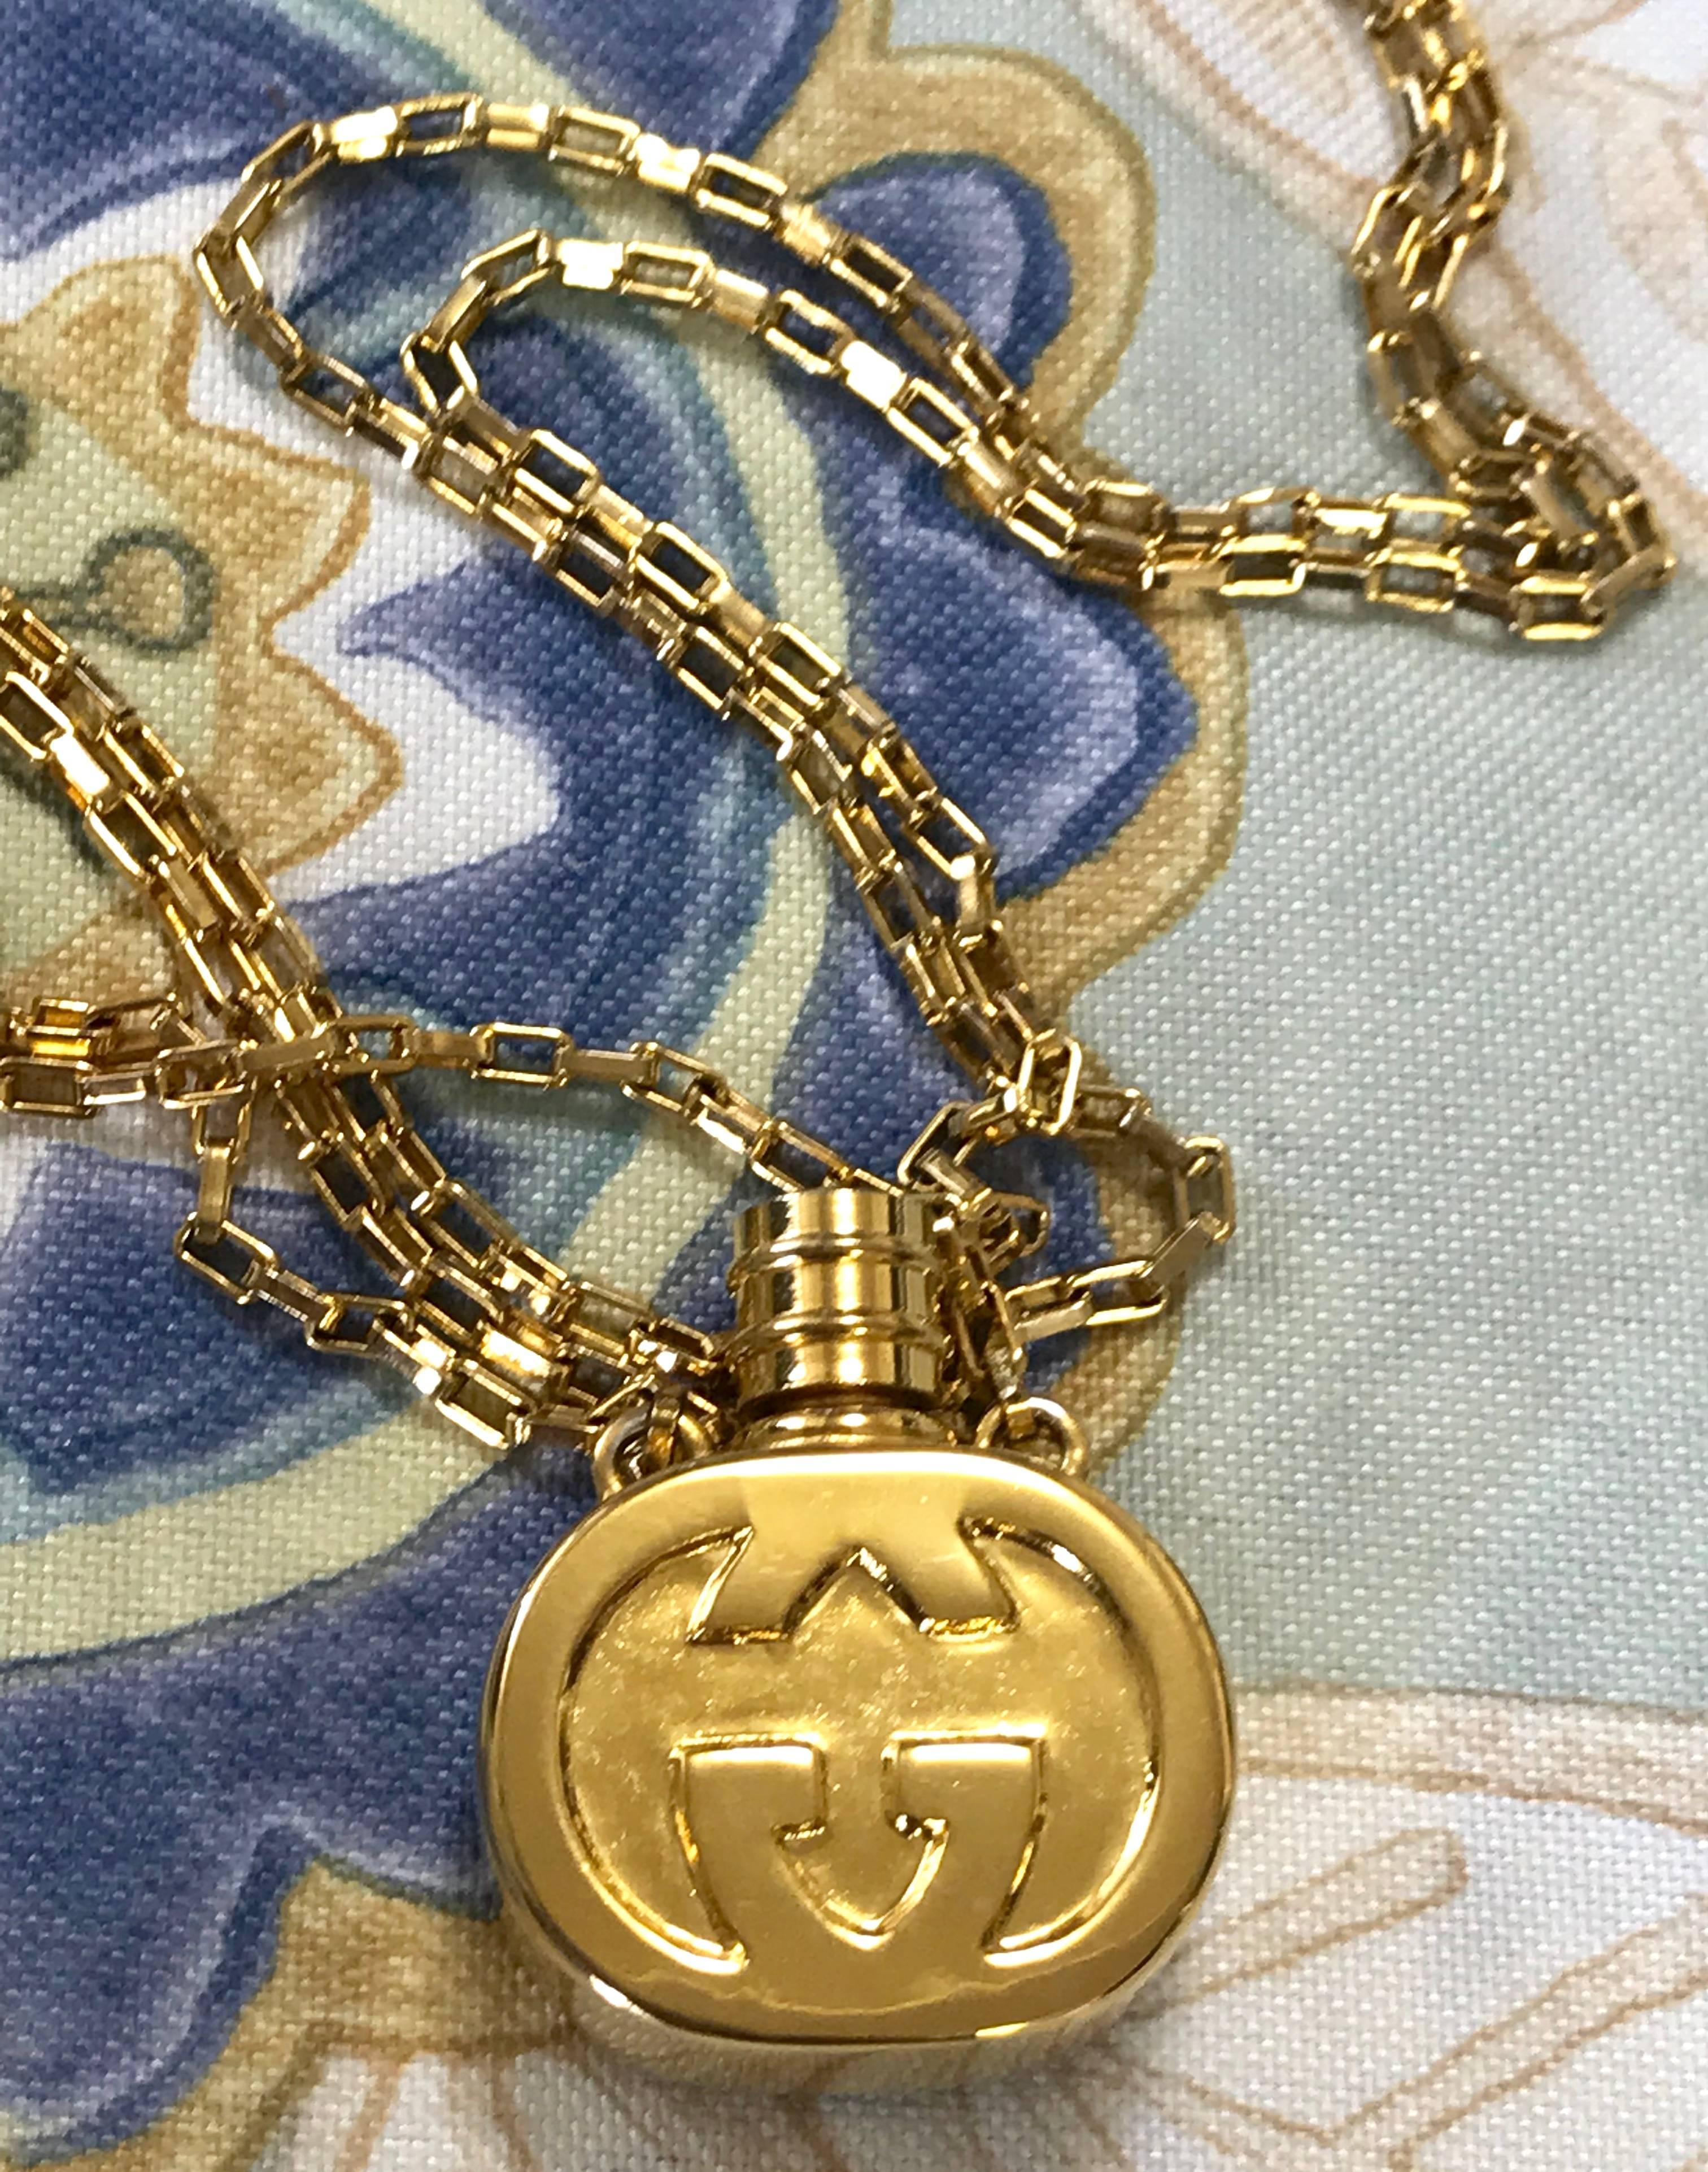 gucci perfume bottle necklace